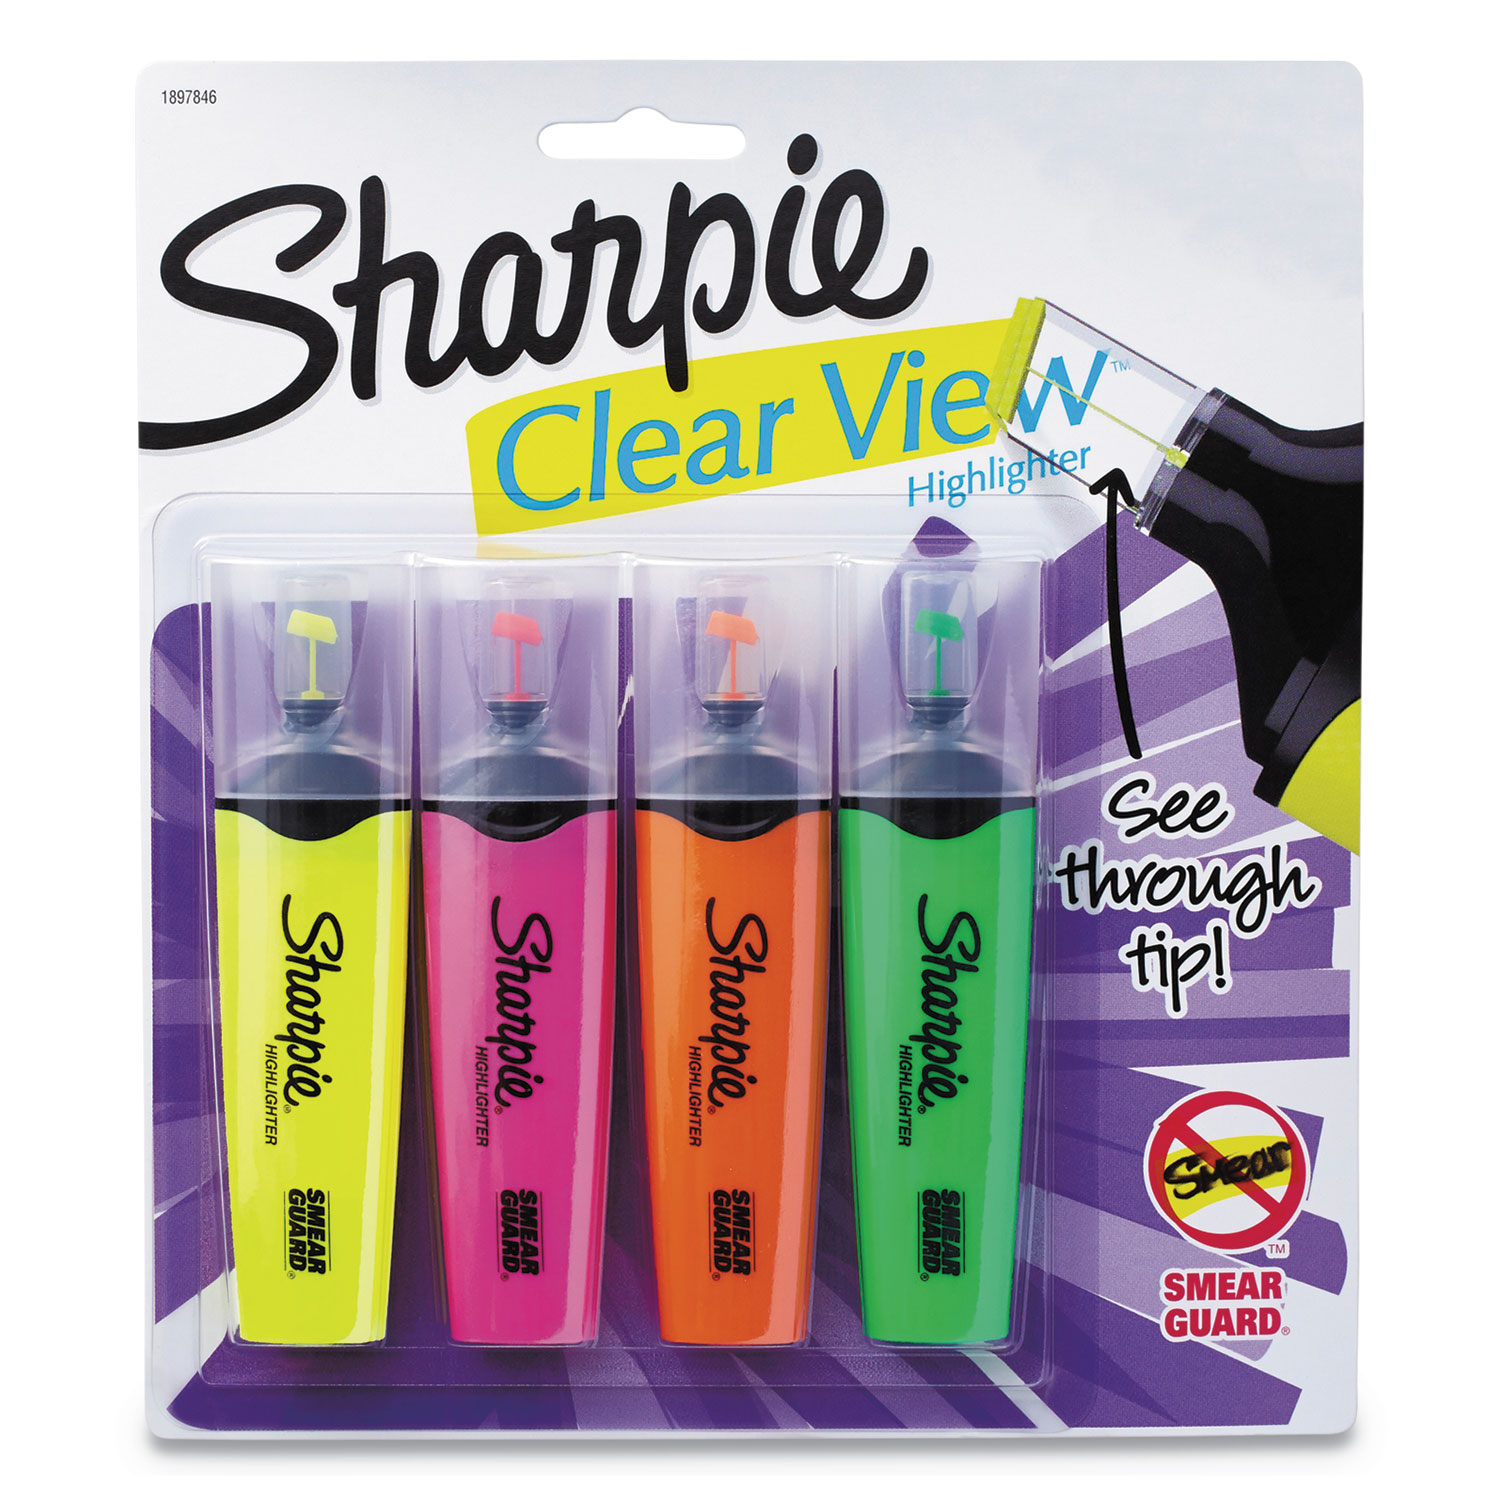  Sharpie 1912769 Clearview Tank-Style Highlighter, Blade Chisel Tip, Assorted Colors, 4/Set (SAN1912769) 